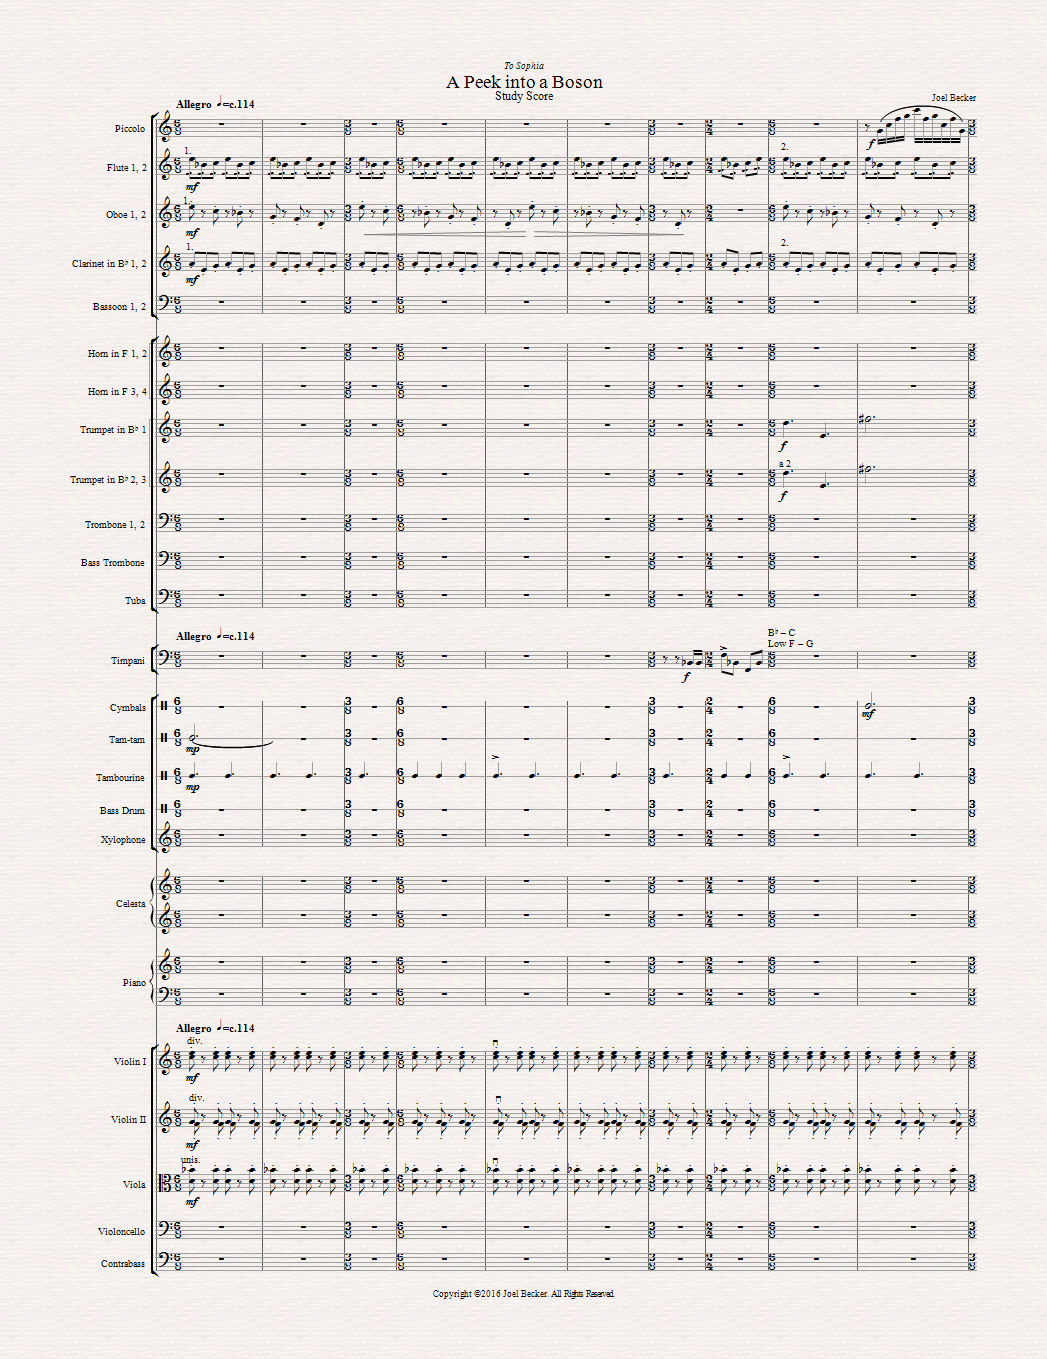 First page of the score